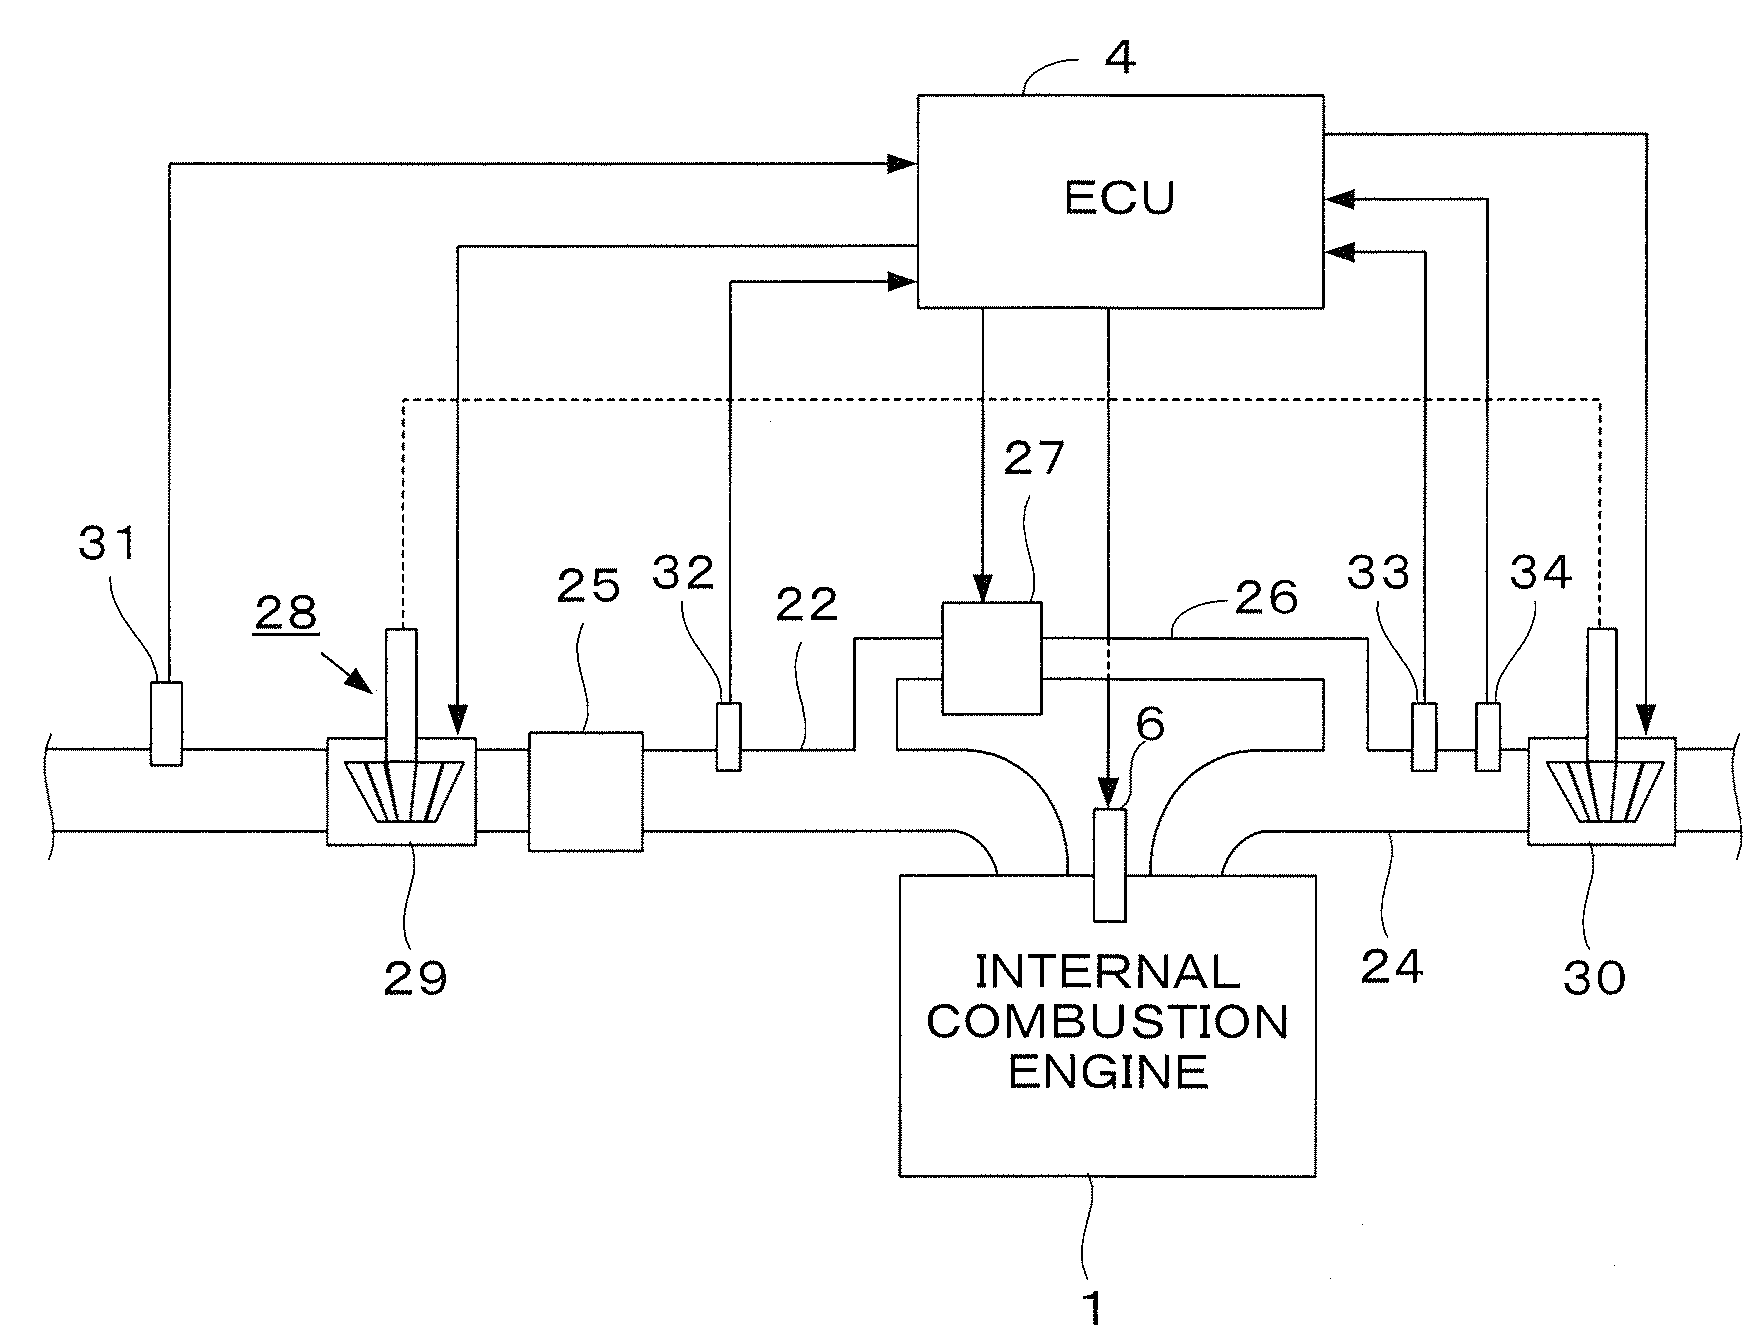 Control System for Internal Combustion Engine